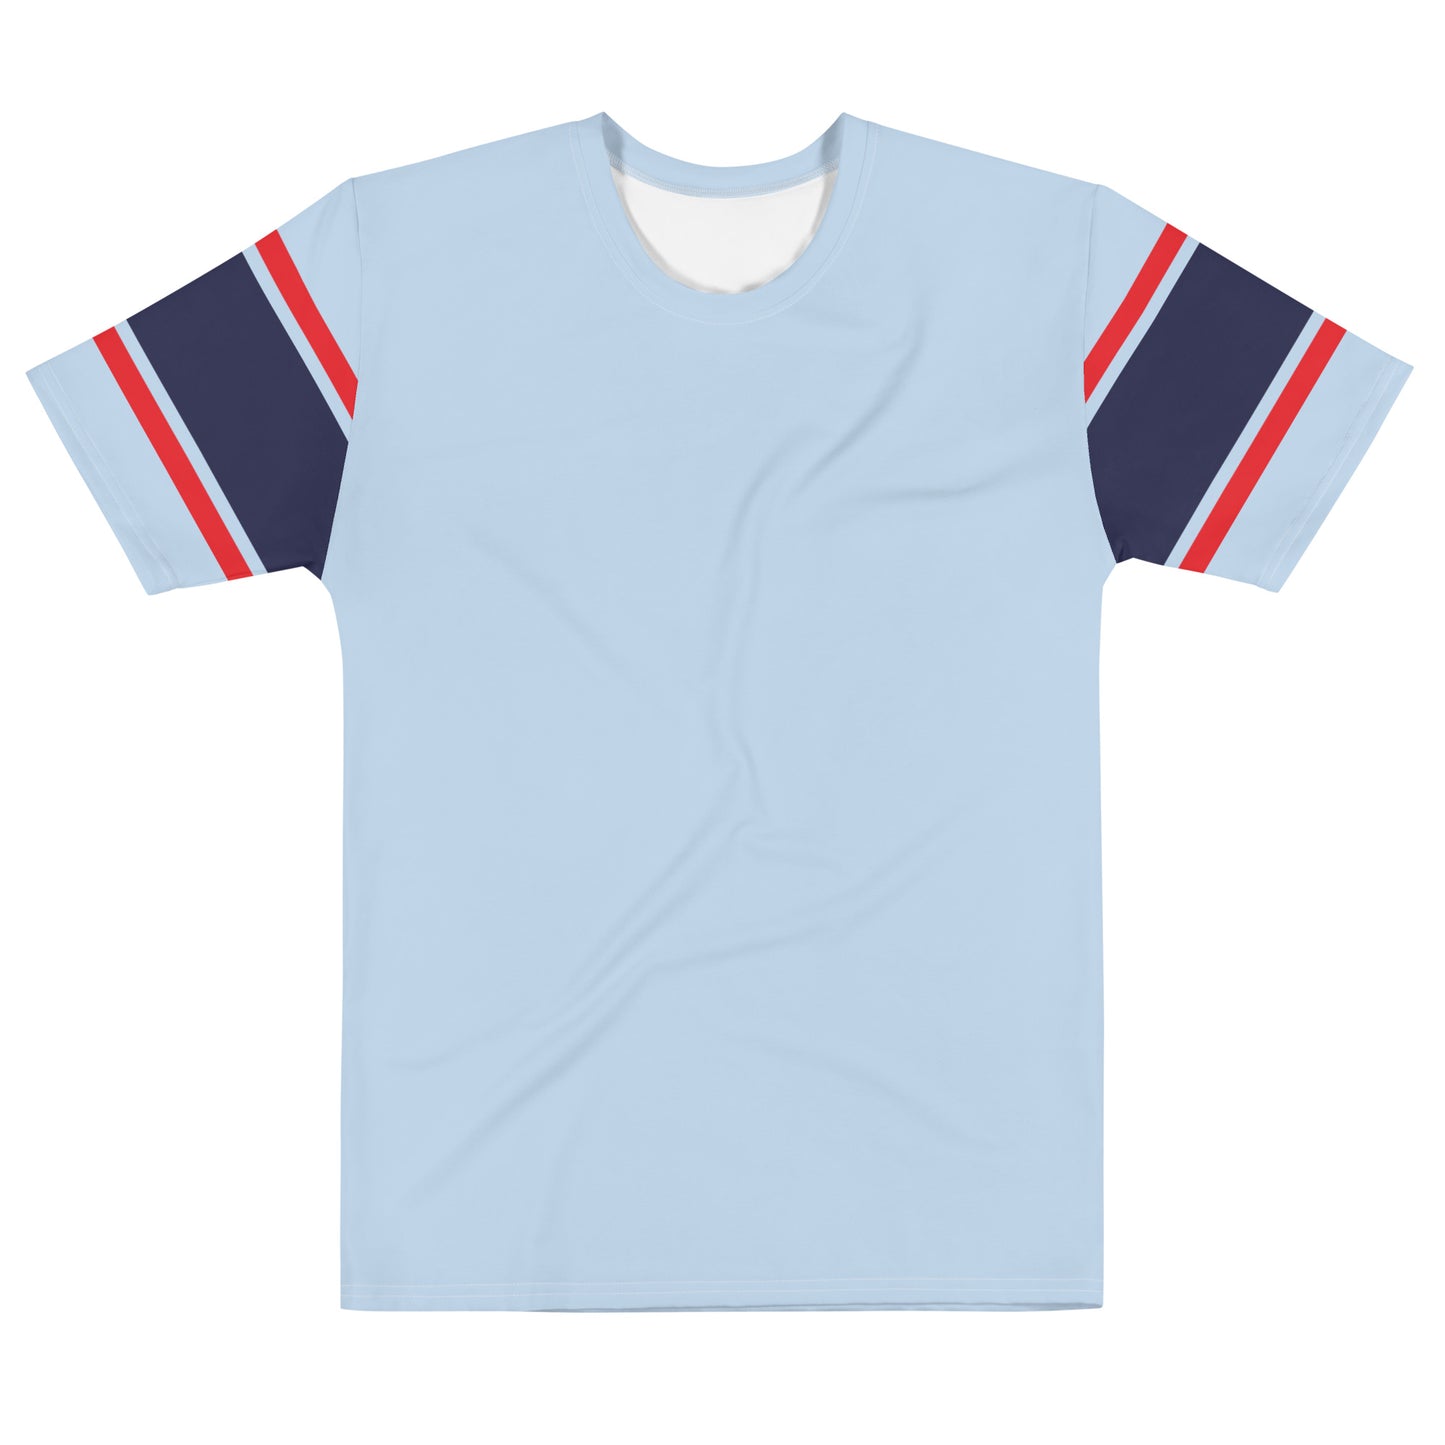 Retro Vibes - Inspired By Taylor Swift - Sustainably Made Men’s Short Sleeve Tee